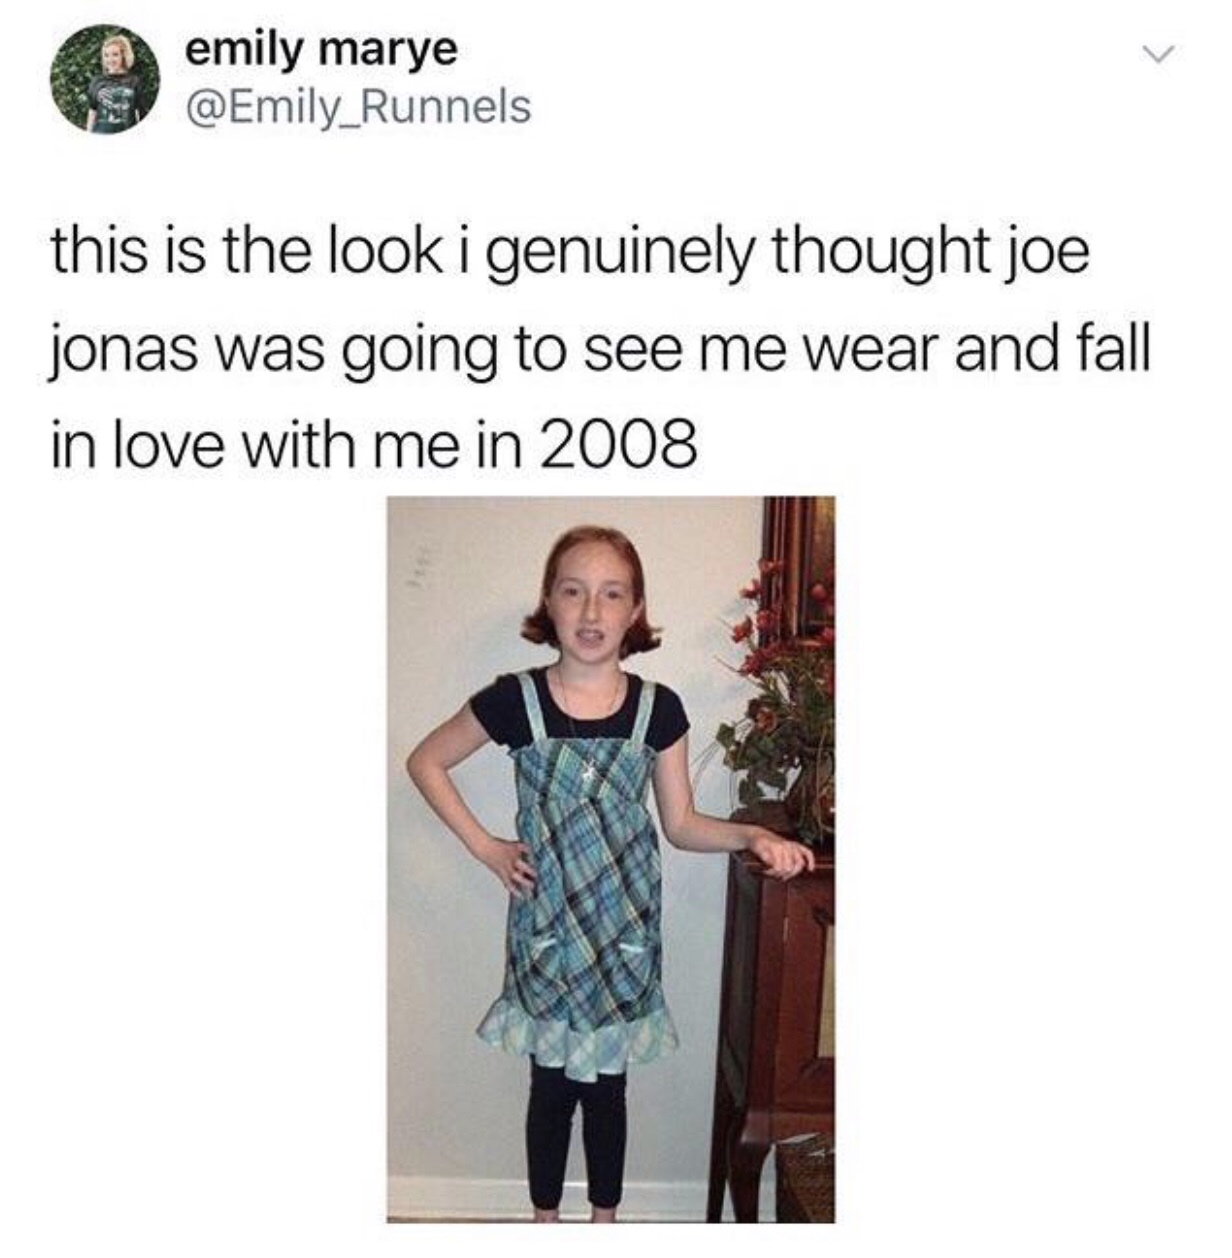 joe jonas meme - emily marye this is the look i genuinely thought joe jonas was going to see me wear and fall in love with me in 2008